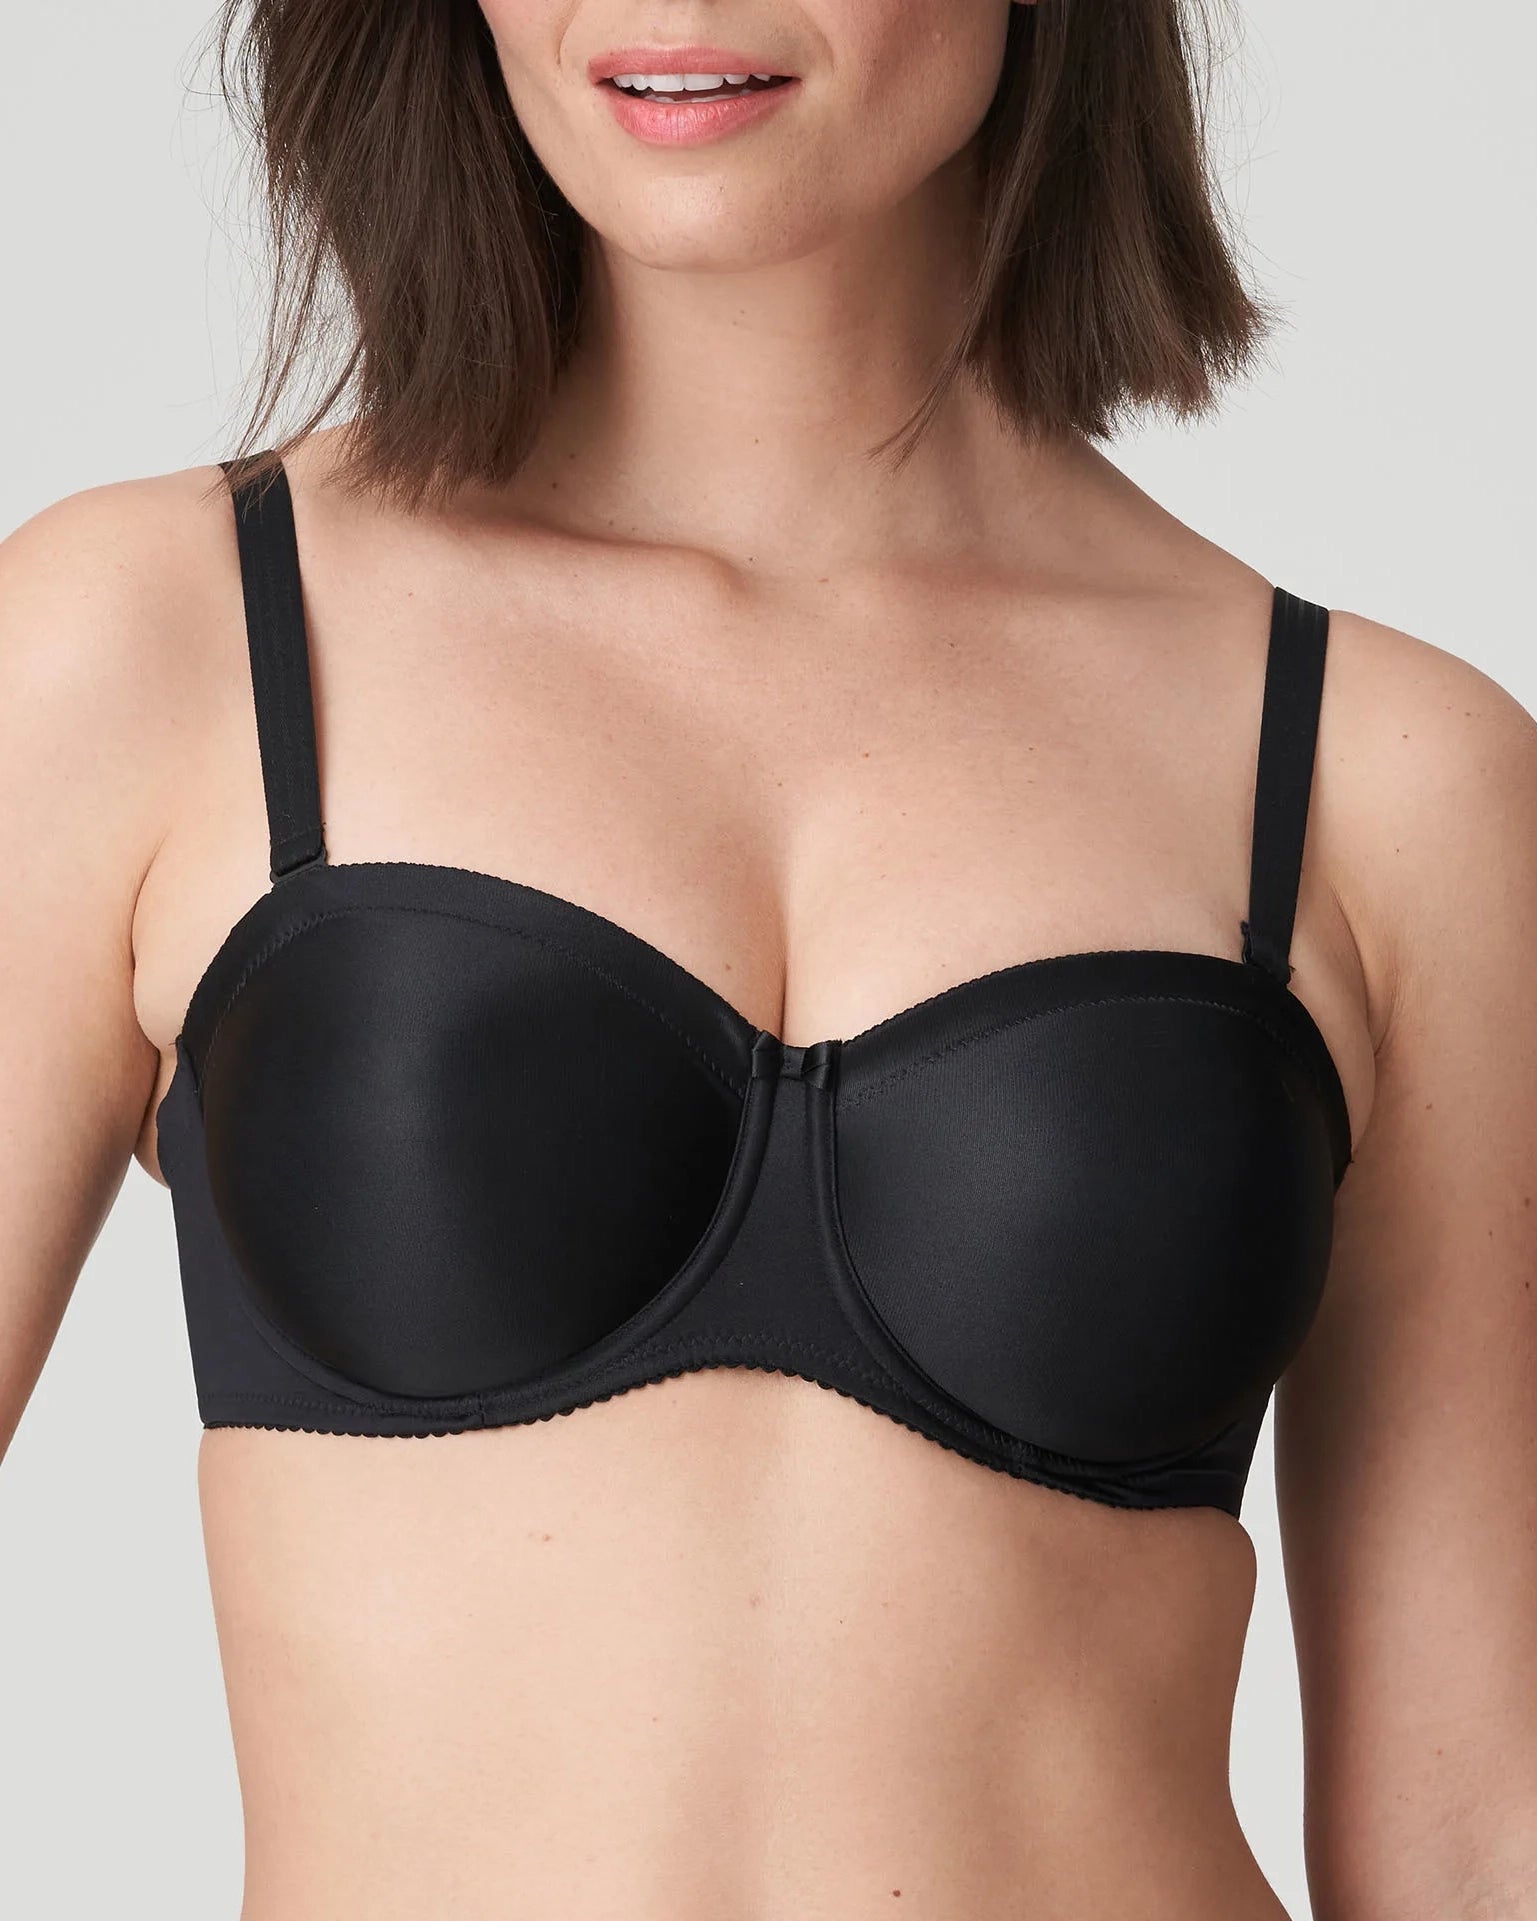 THE BRA STUDIO by Lulabelle on X: Sometimes a girl just needs a basic bra PRIMA  DONNA SATIN. B-H Cup. Book your fitting at  # primadonna #lingerie #brathatfits  / X